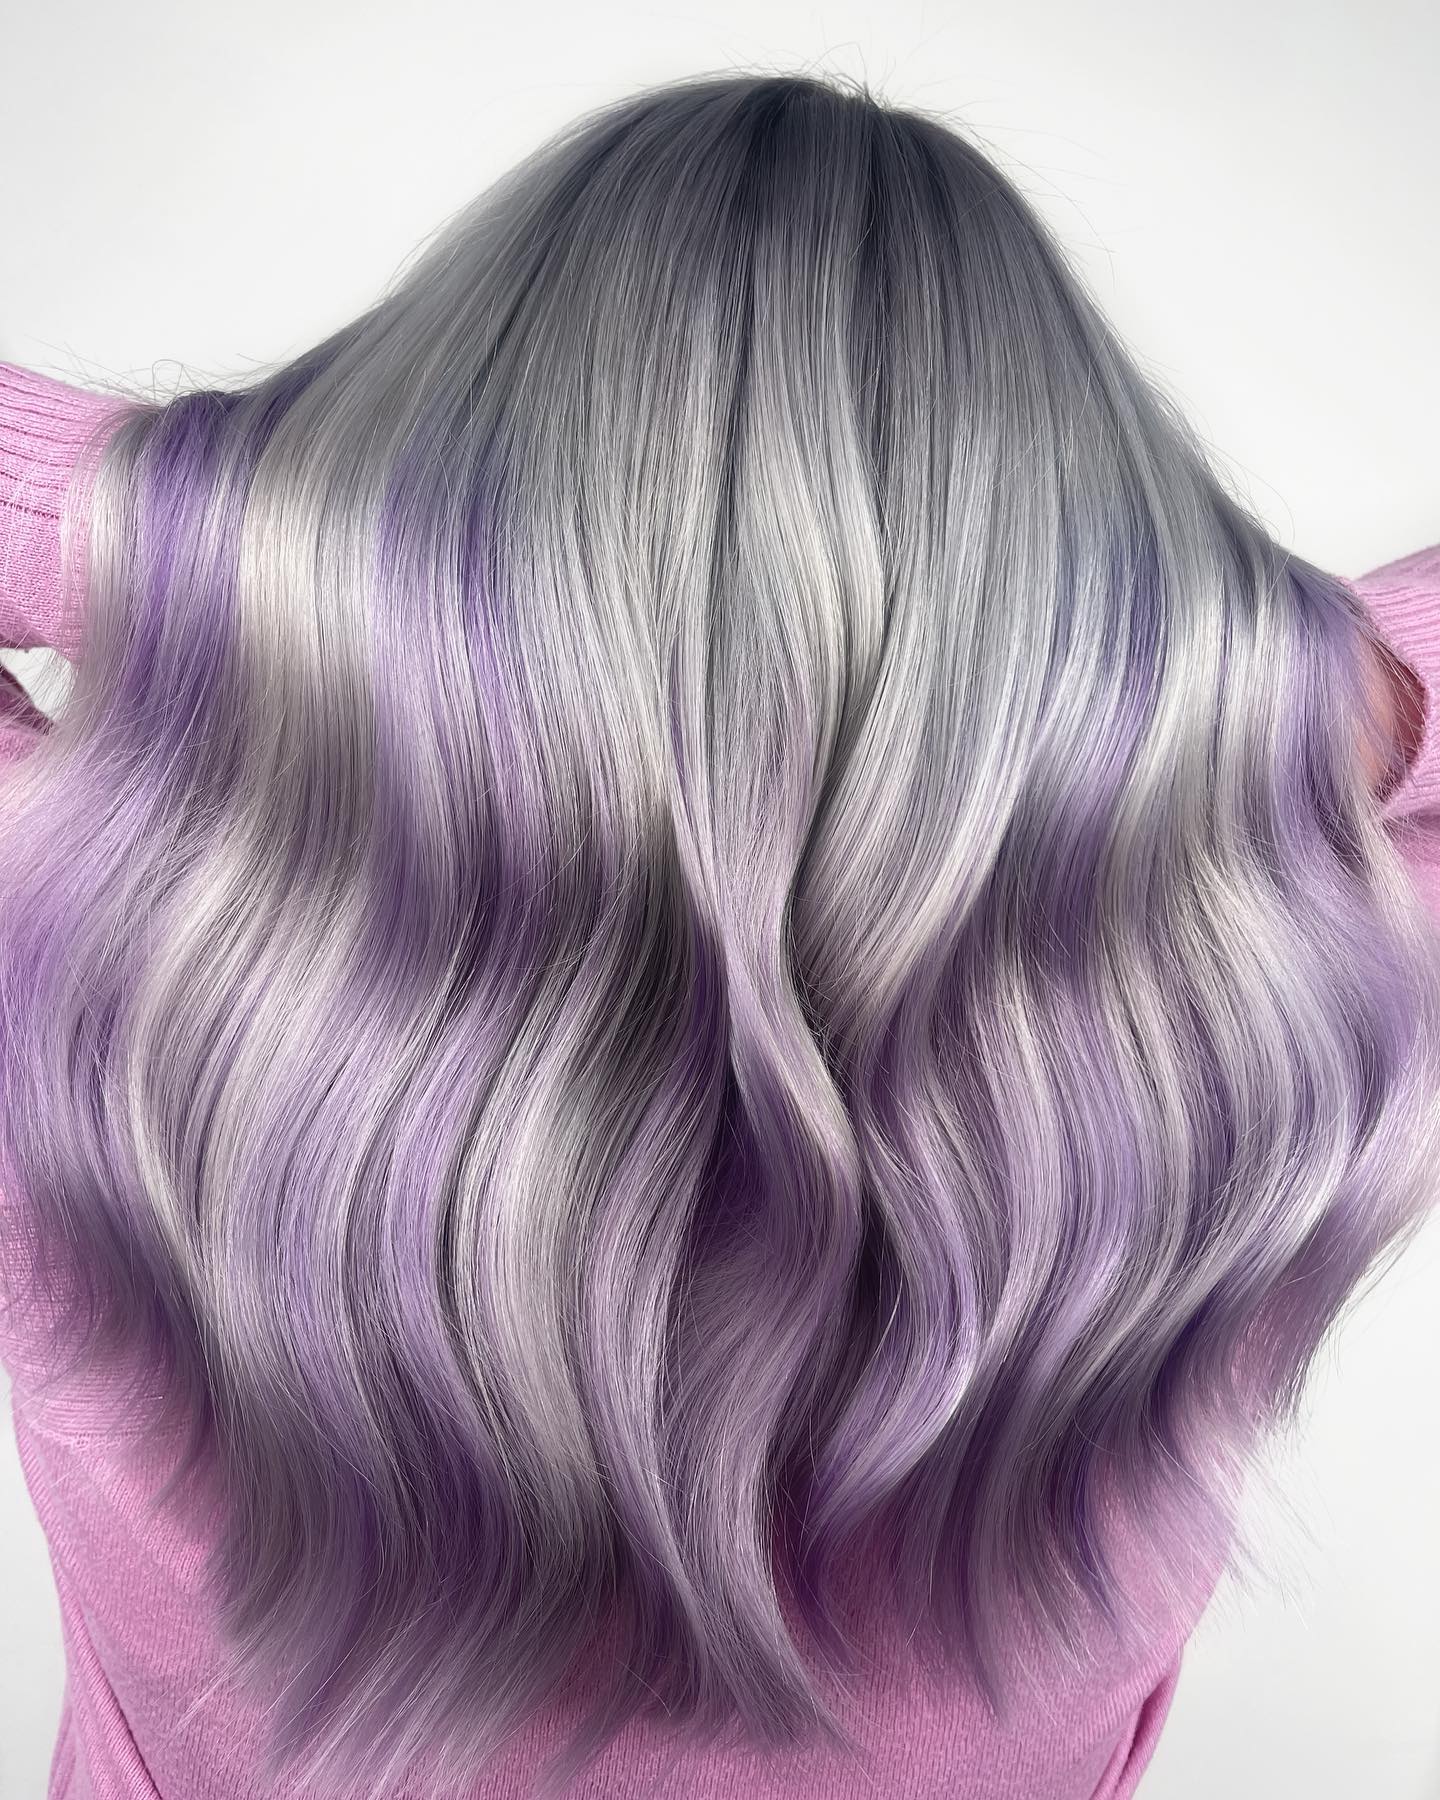 Long Shiny Hair with Lavender Color Hints